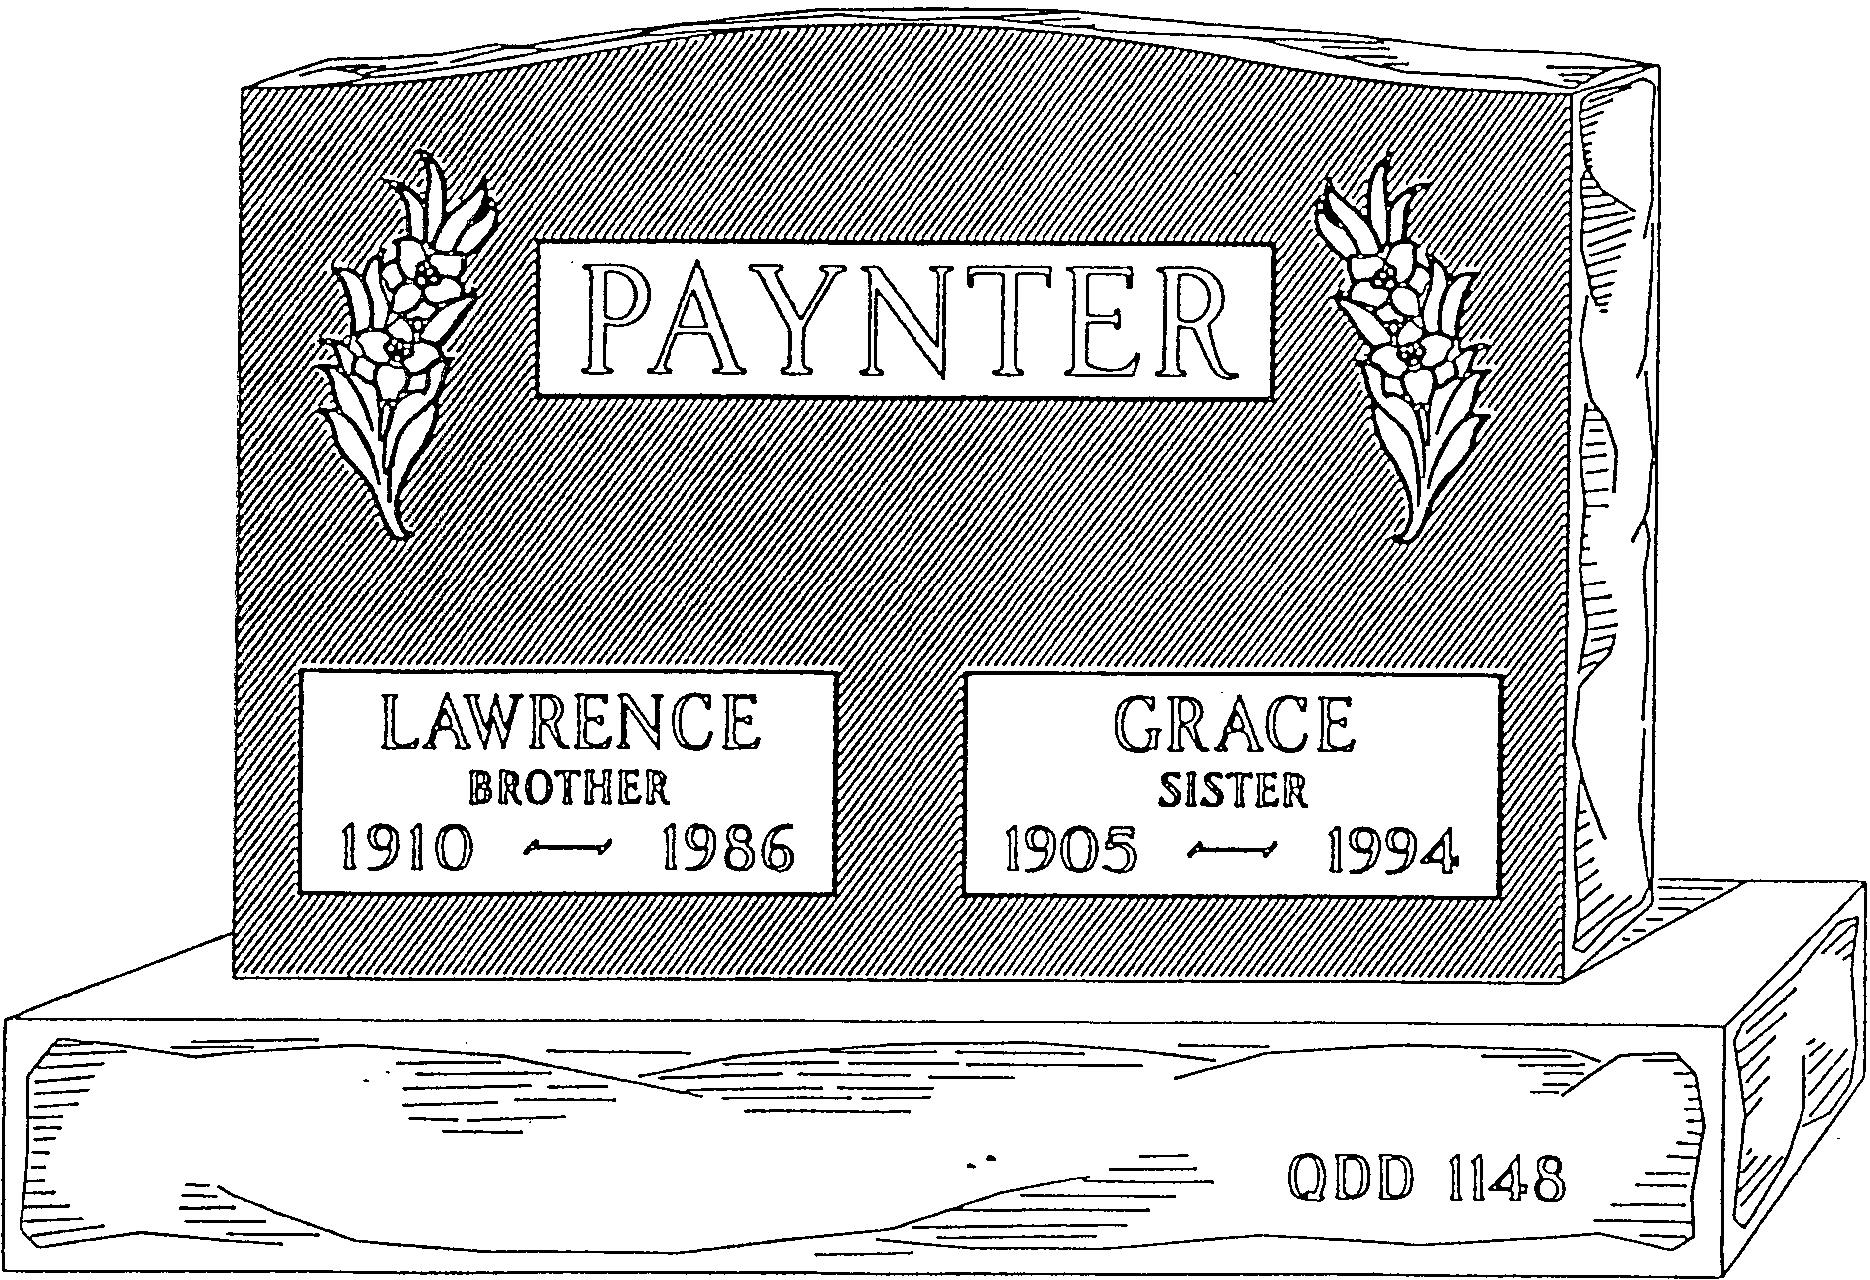 a black and white drawing of a gravestone for lawrence and grace paynter .